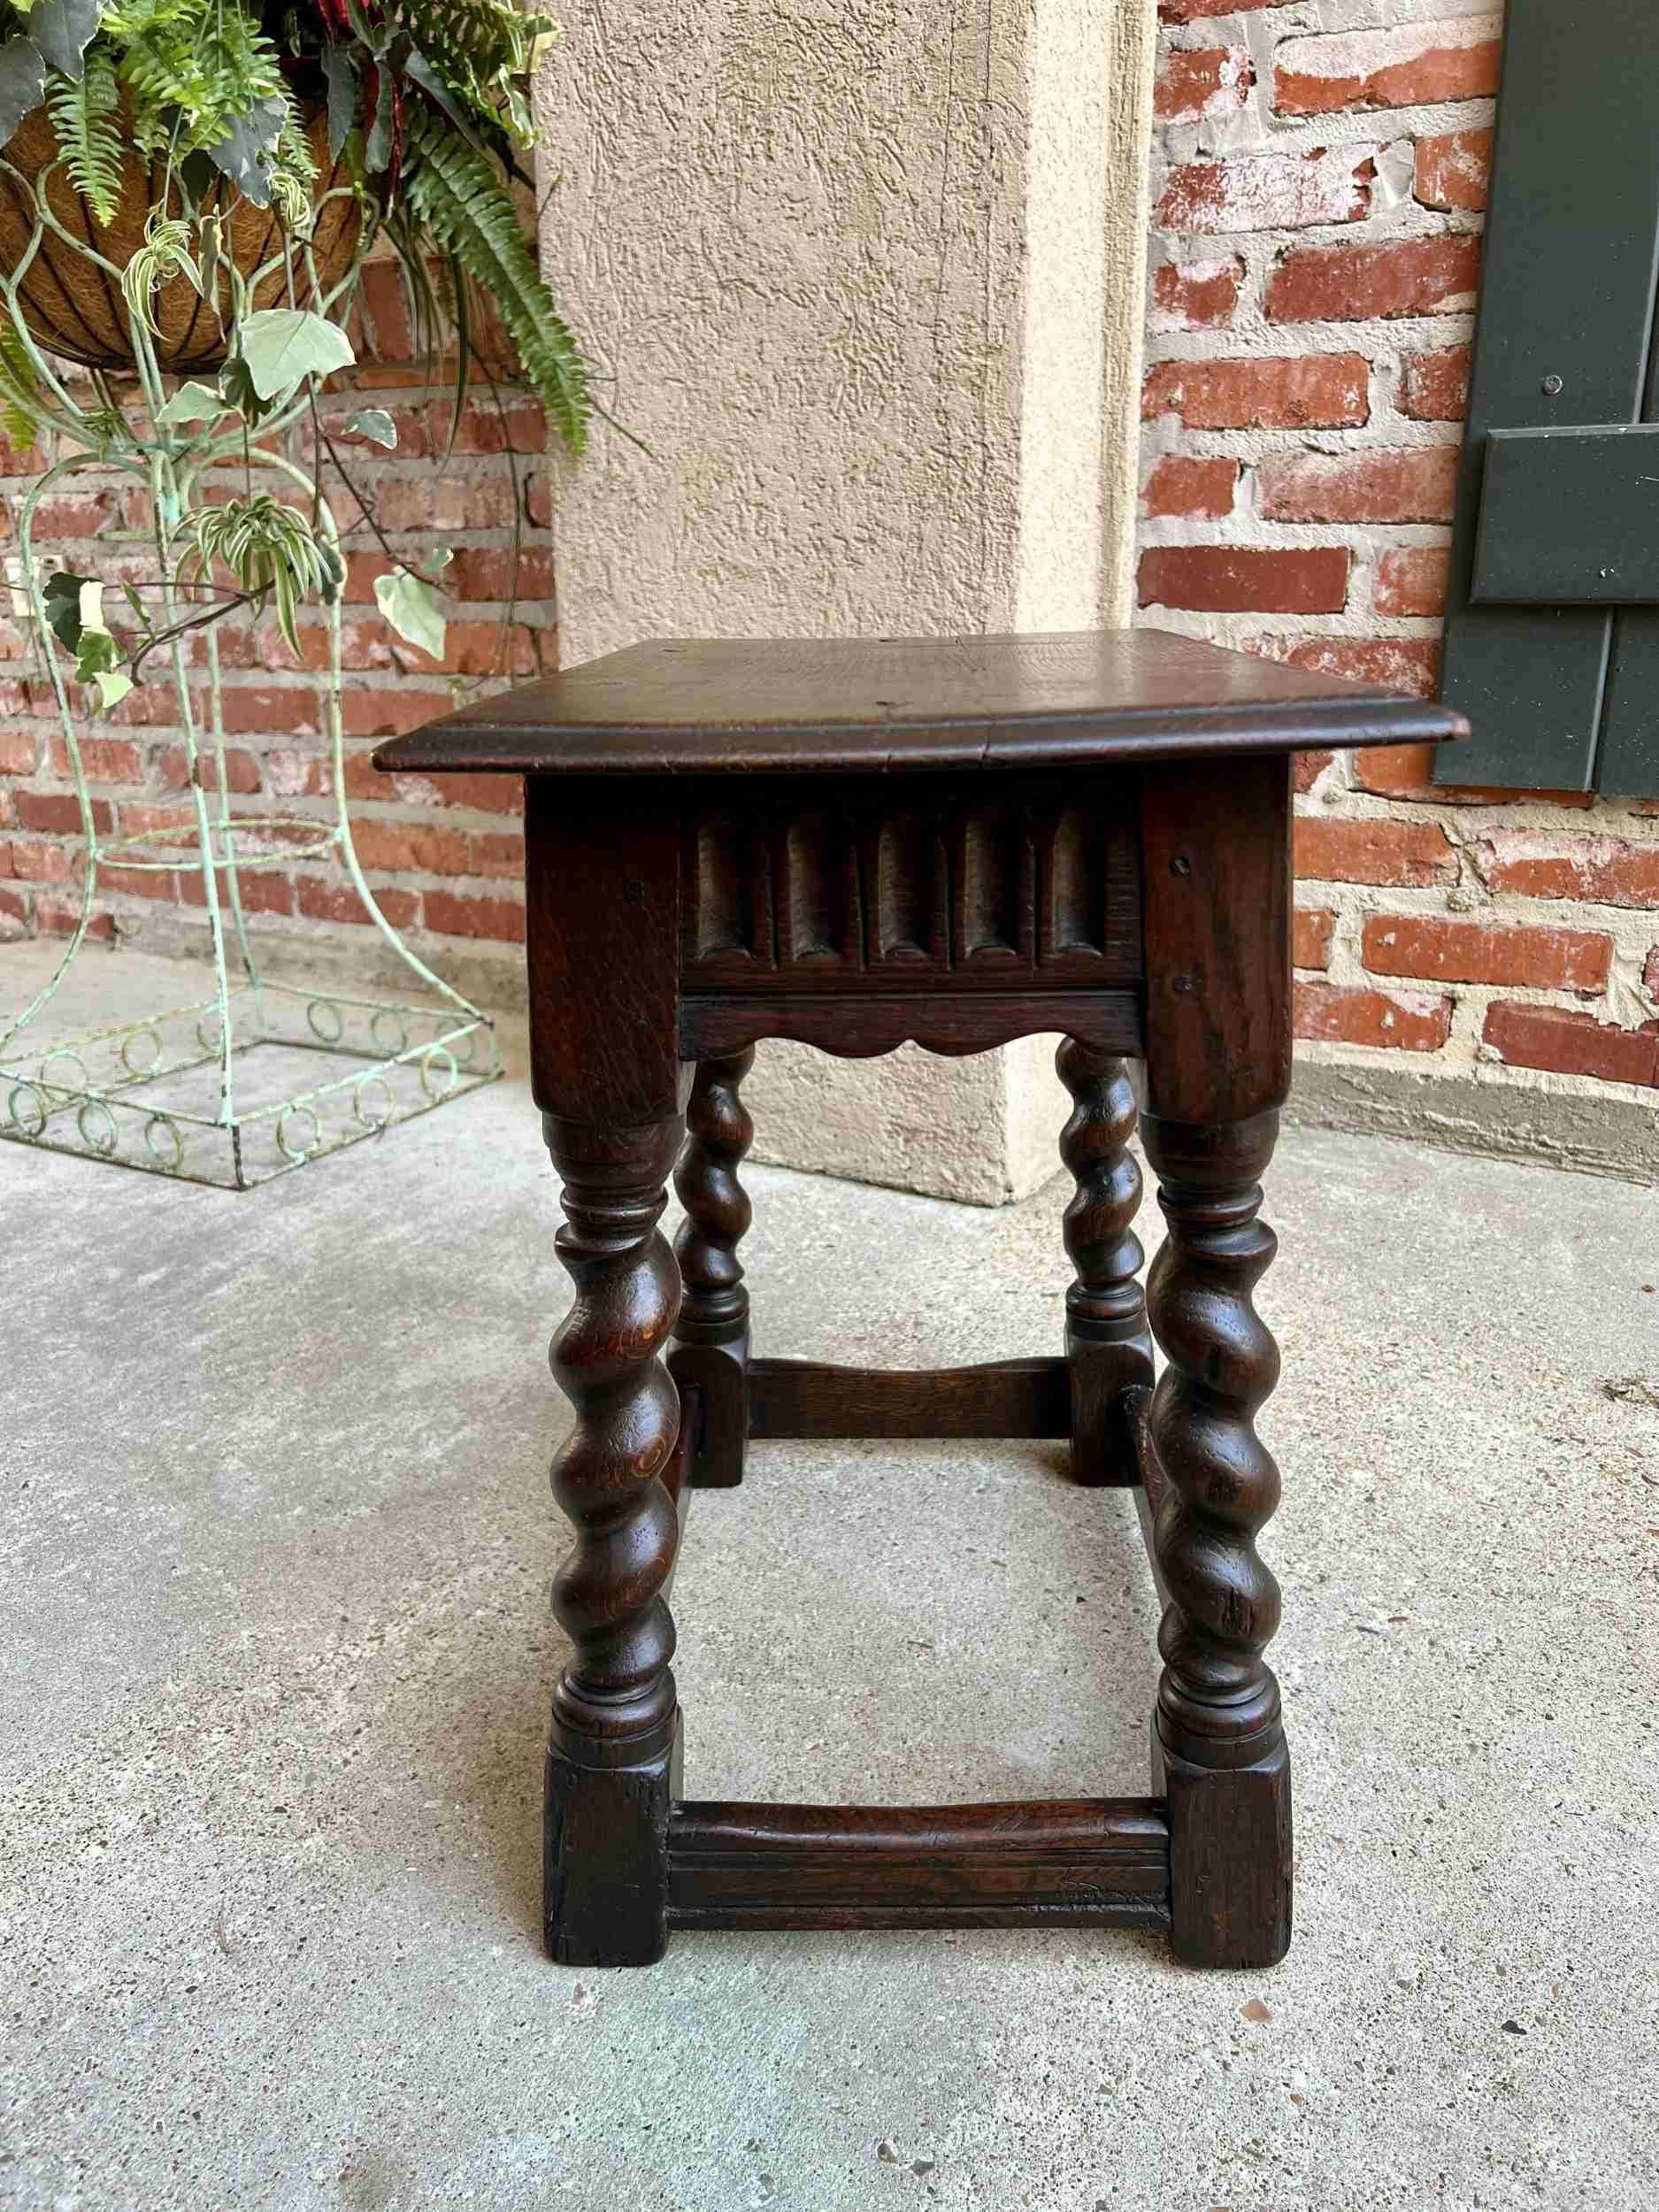 Late 19th Century 19th Century English Carved Oak Jacobean Joint Stool Bench Barley Twist Pegged